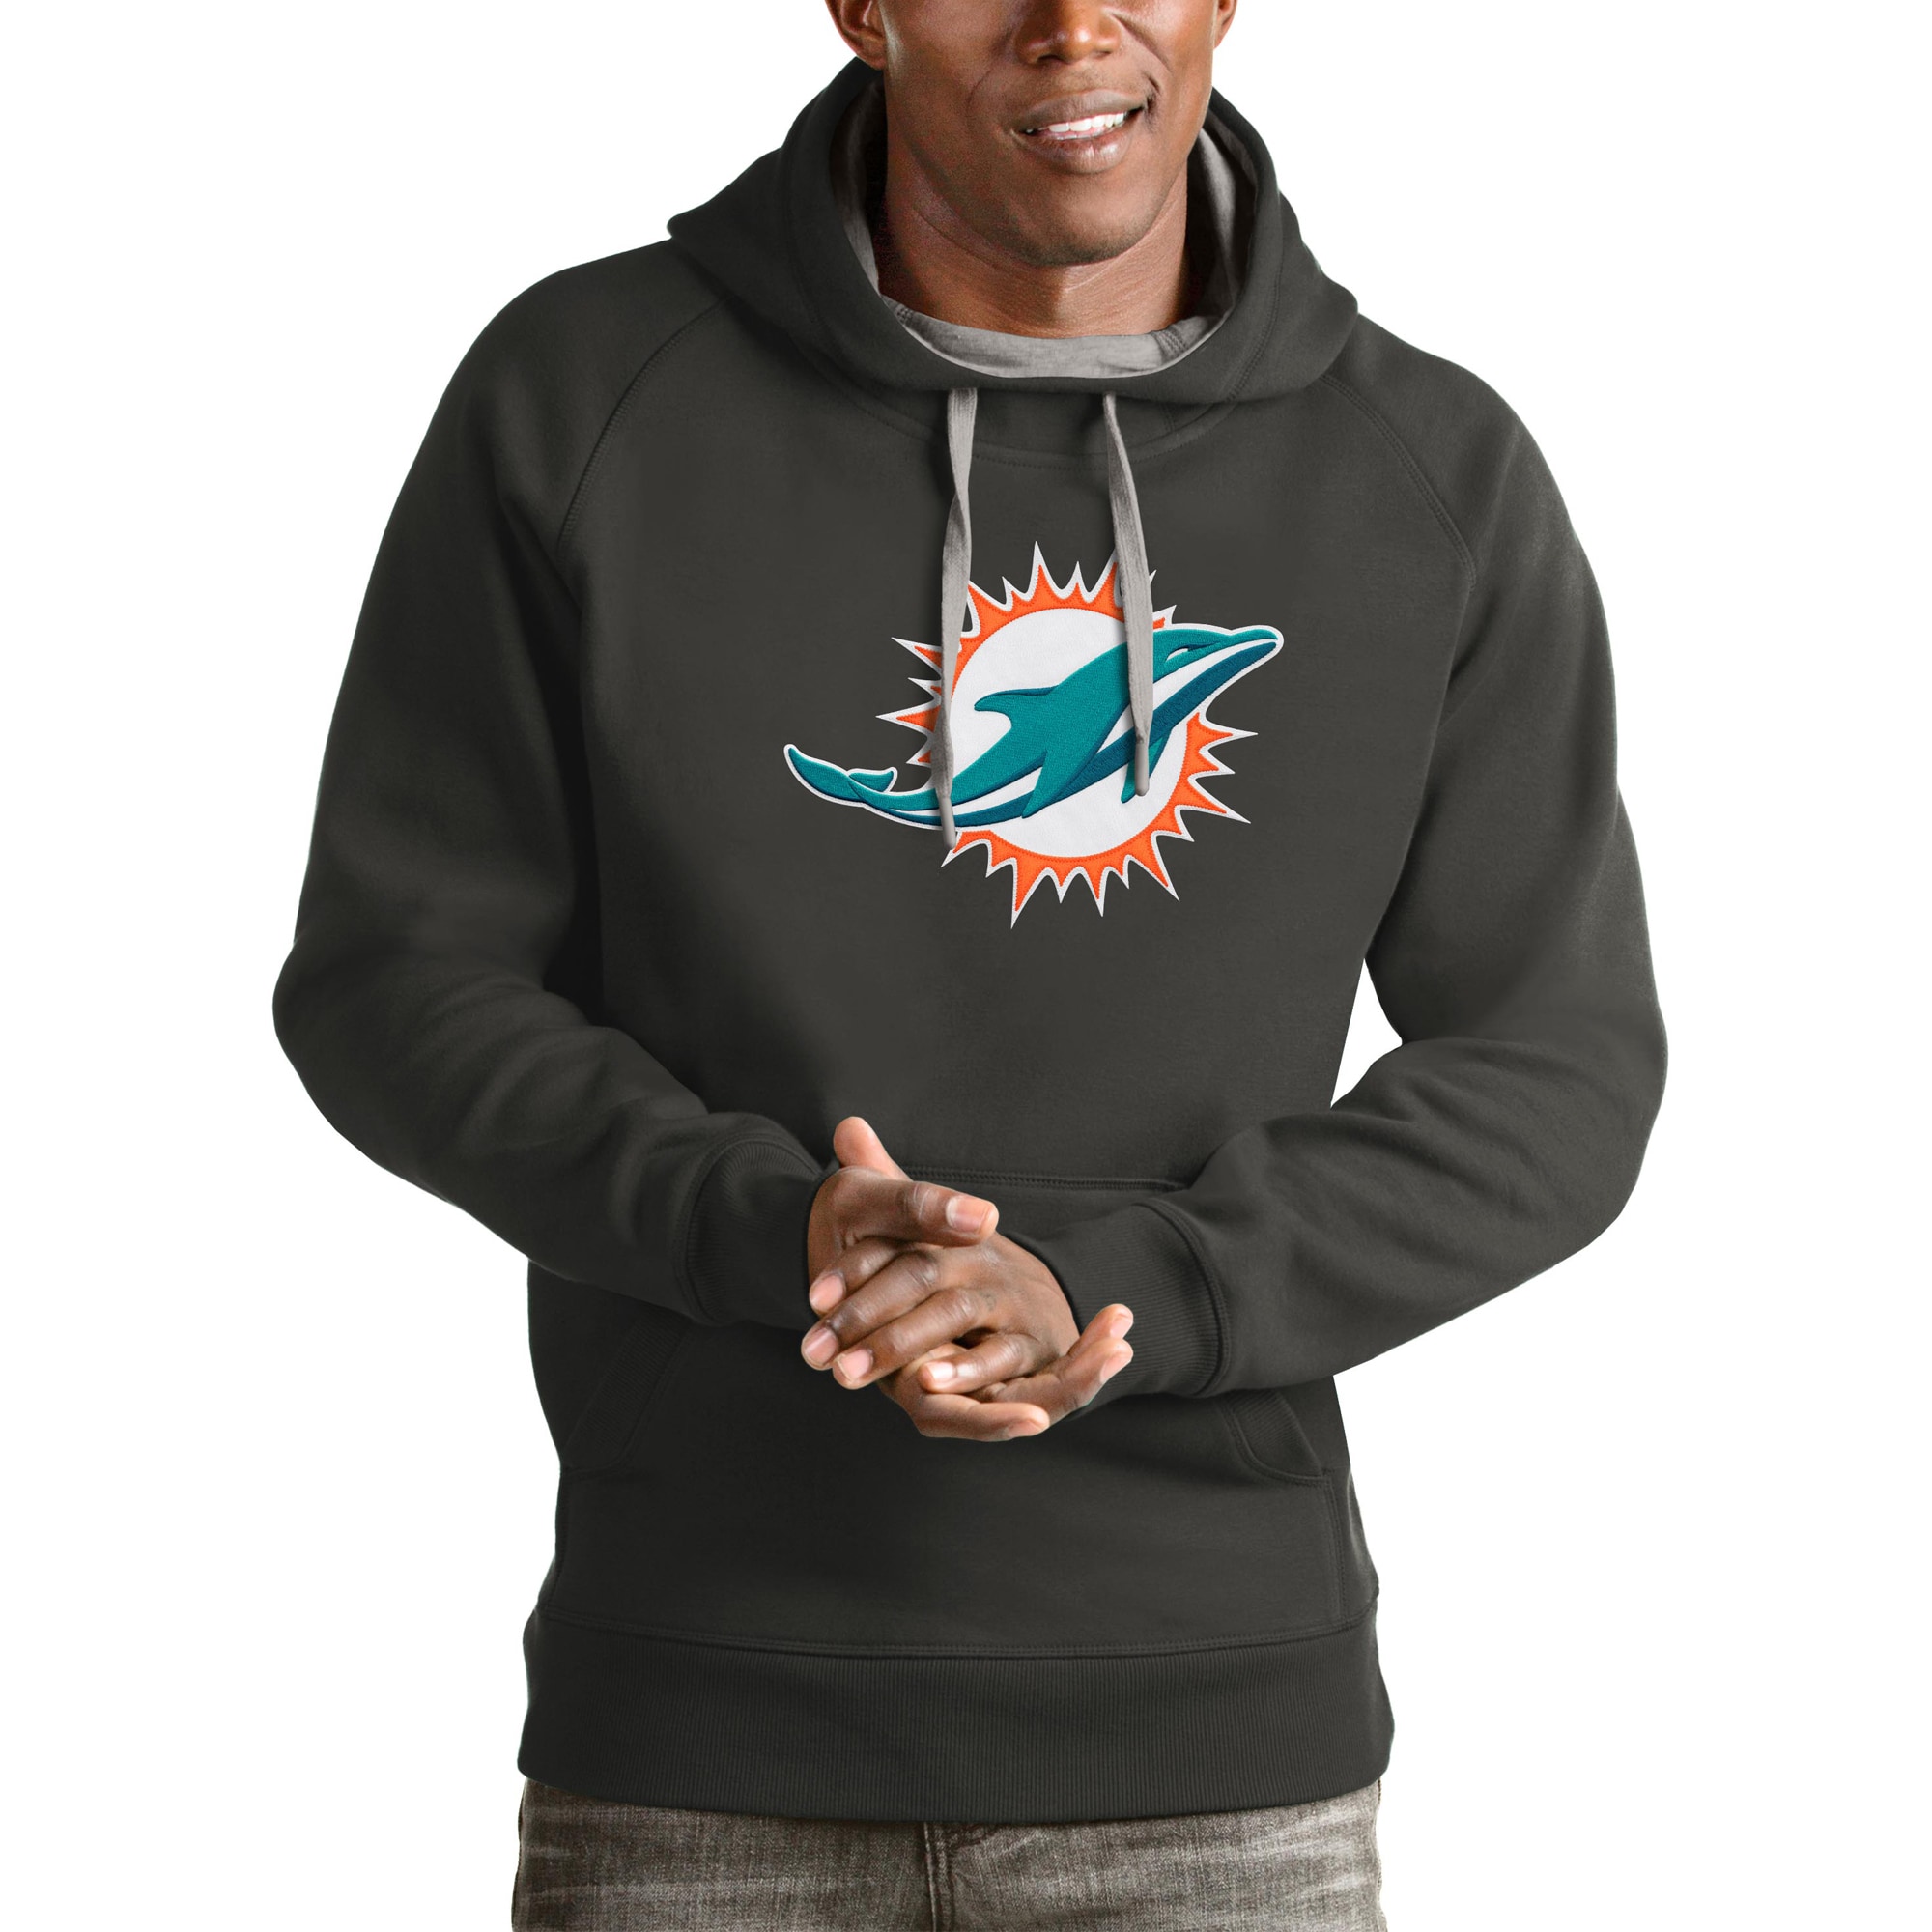 Men's Antigua Charcoal Miami Dolphins Victory Pullover Hoodie - image 1 of 1